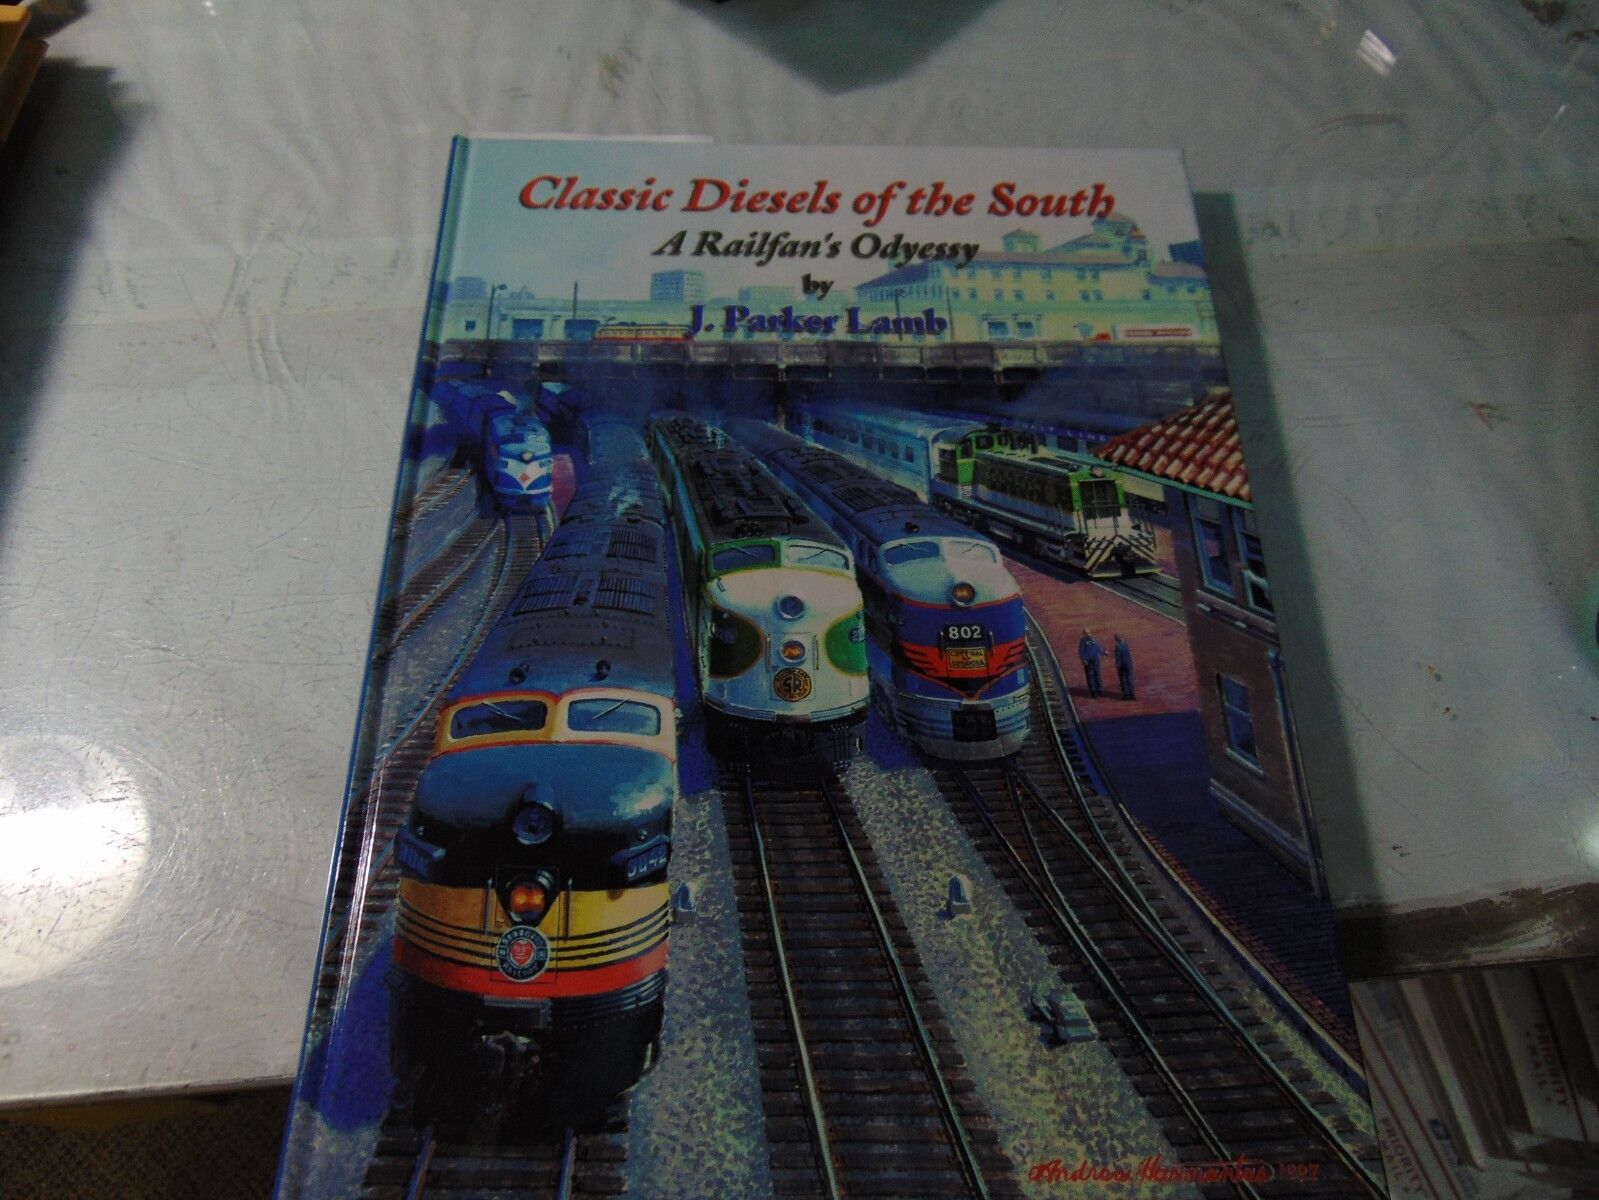 Classic Diesels of the South A Railfan’s Odyessy, J Parker Lamb Hard Cover, 337